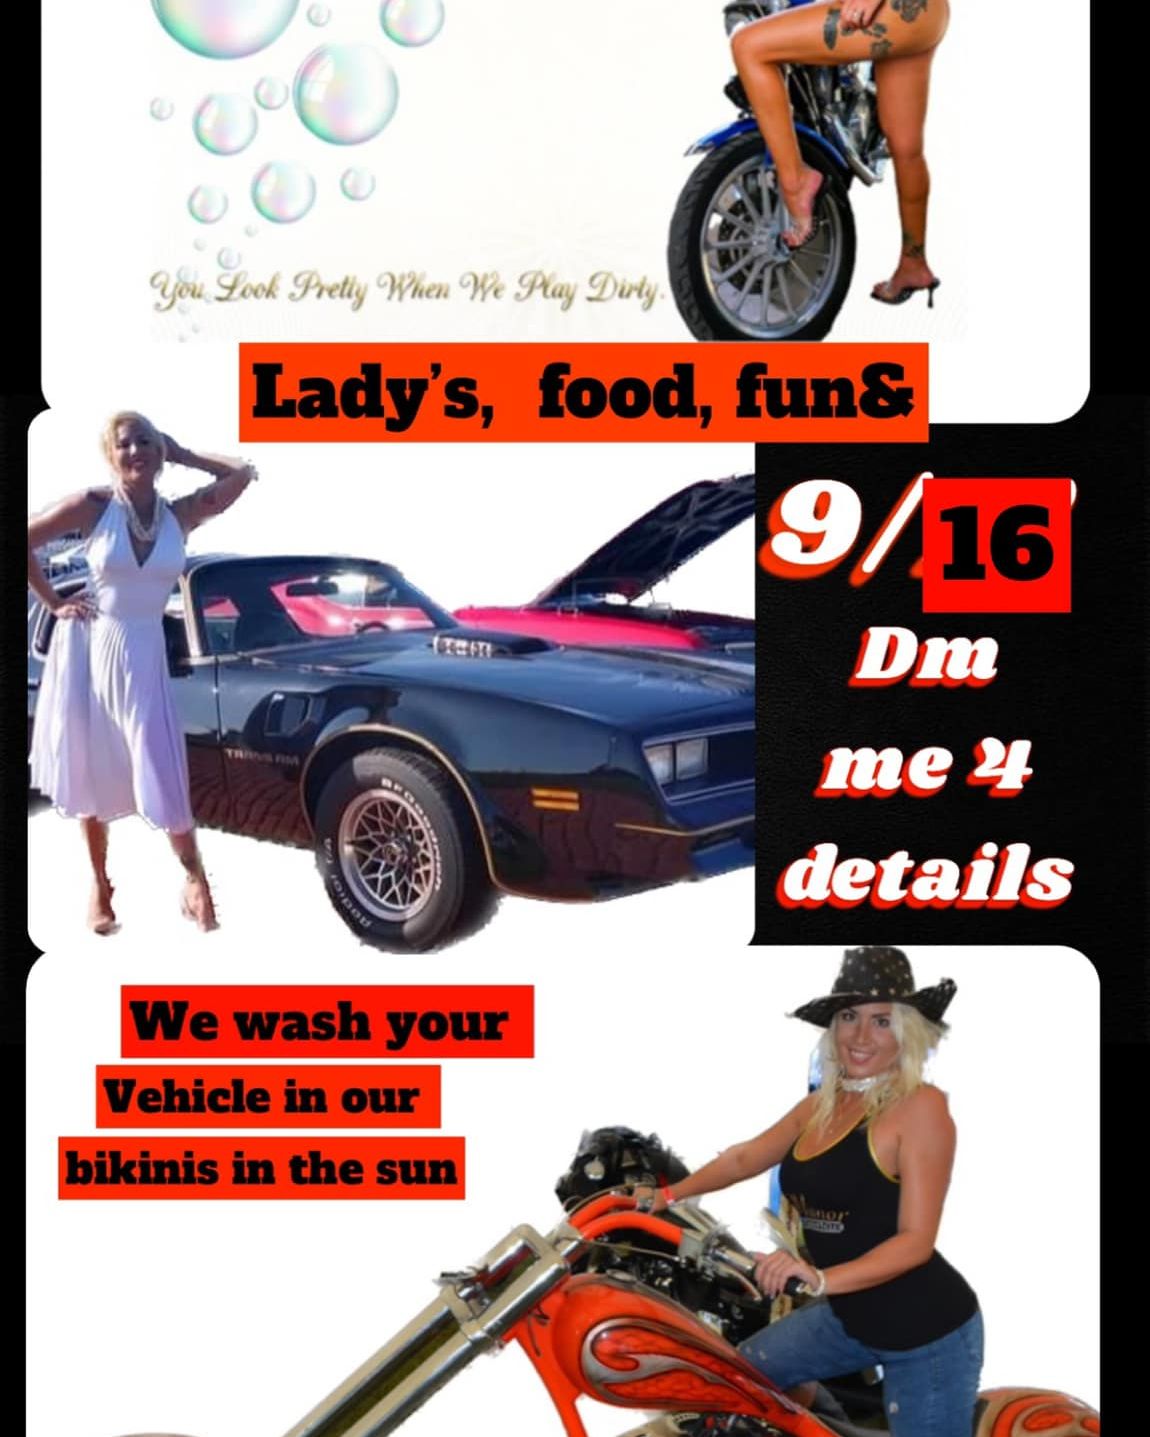 Vip sexy bikini wash you bring him and Dirty and my girls will clean it up for you !!!￼ lots of sexy ladies, photographers networking event while you get your vehicles washed there will be food, games entertainment, and Moore don’t miss out! This Saturday!!! DM md for details